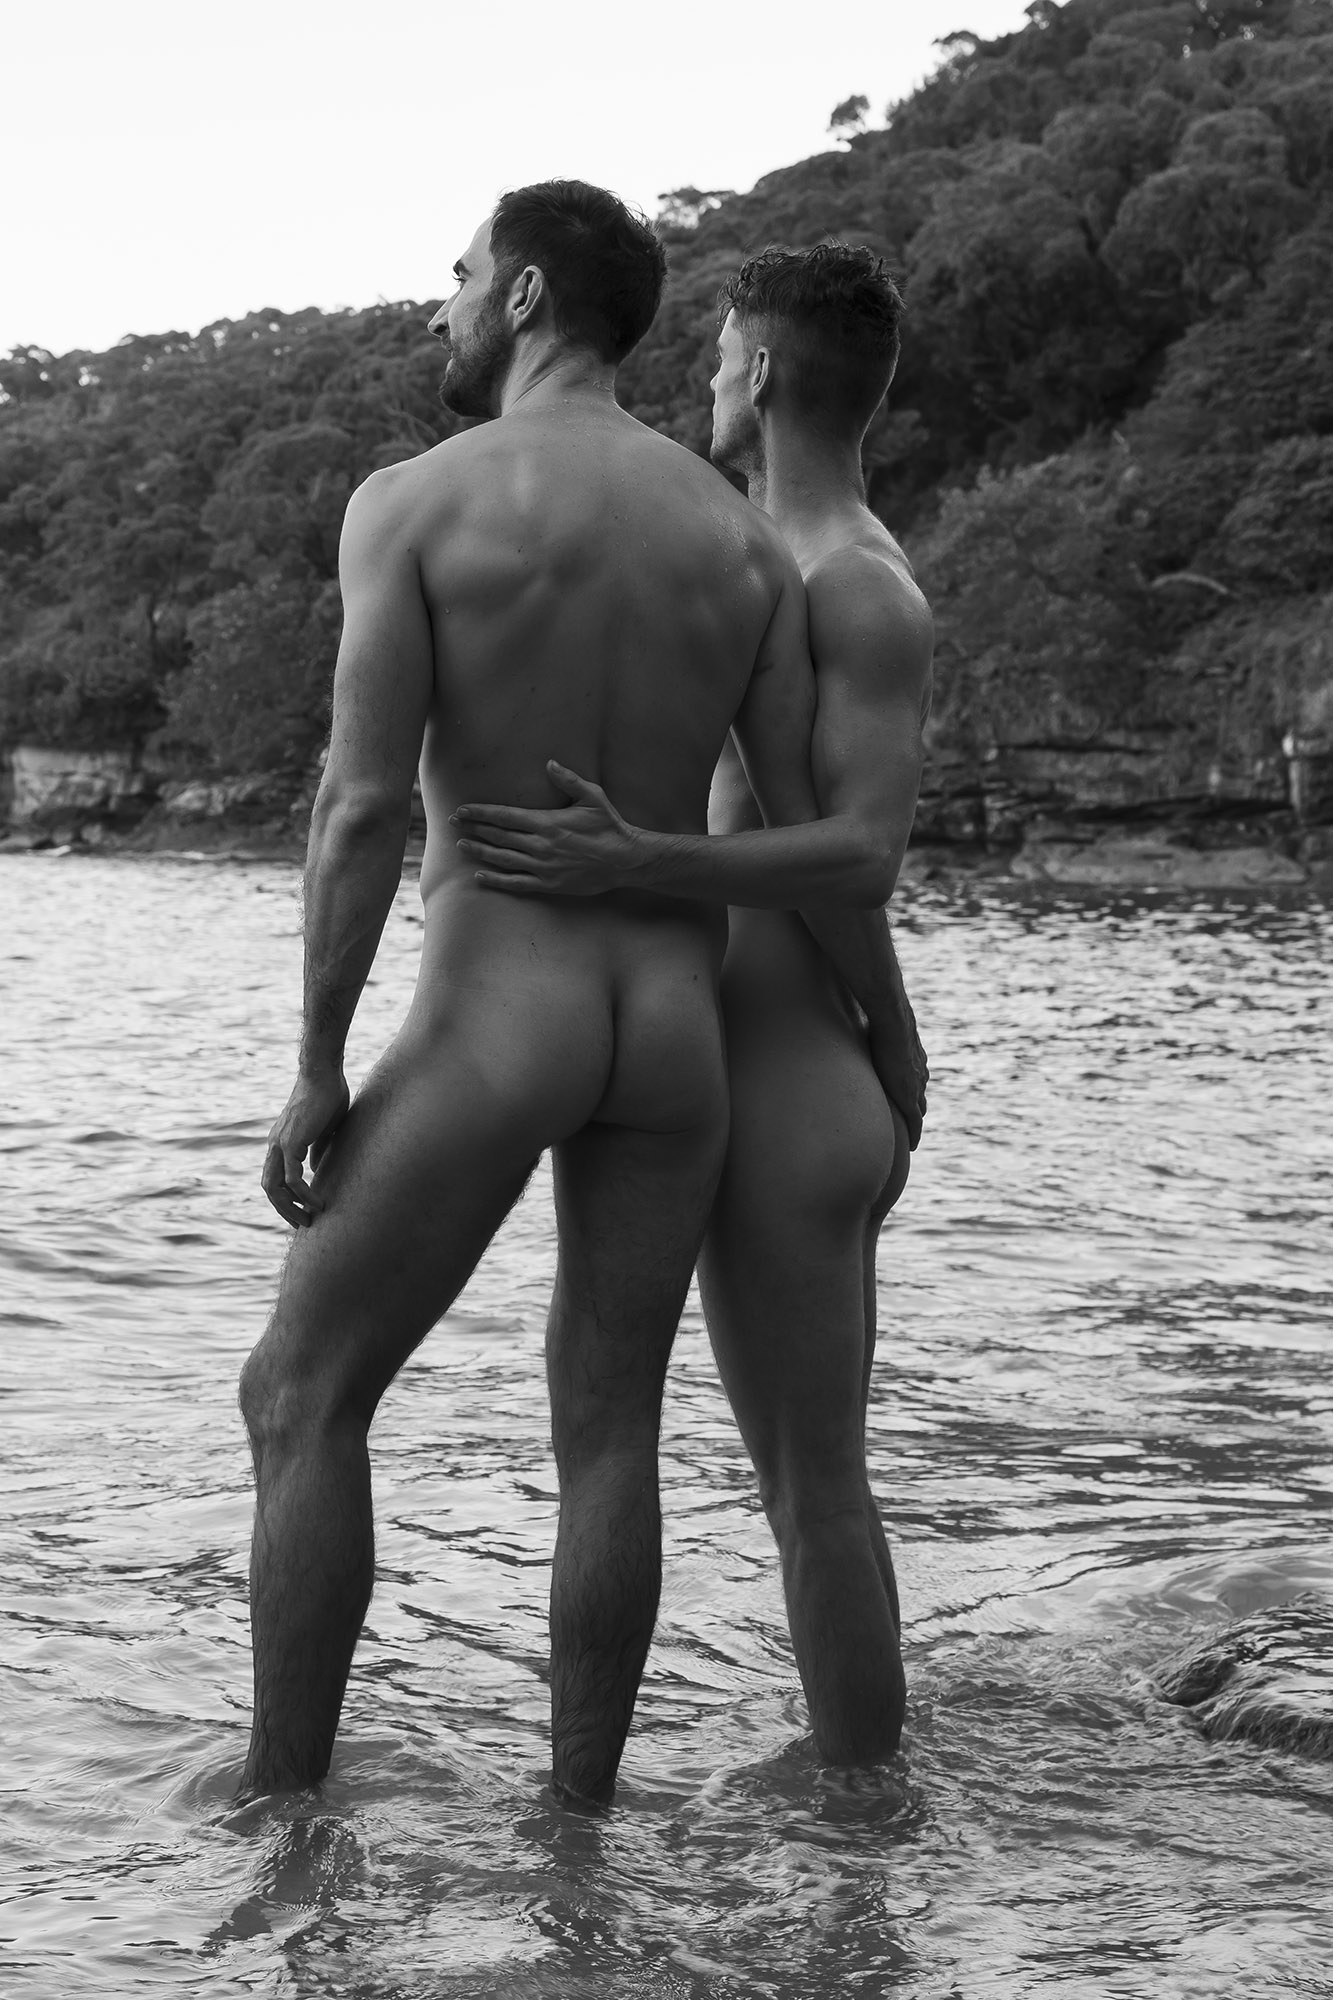 EXPLICIT CONTENT – «LUKE AND JIM» by Brenton Parry.